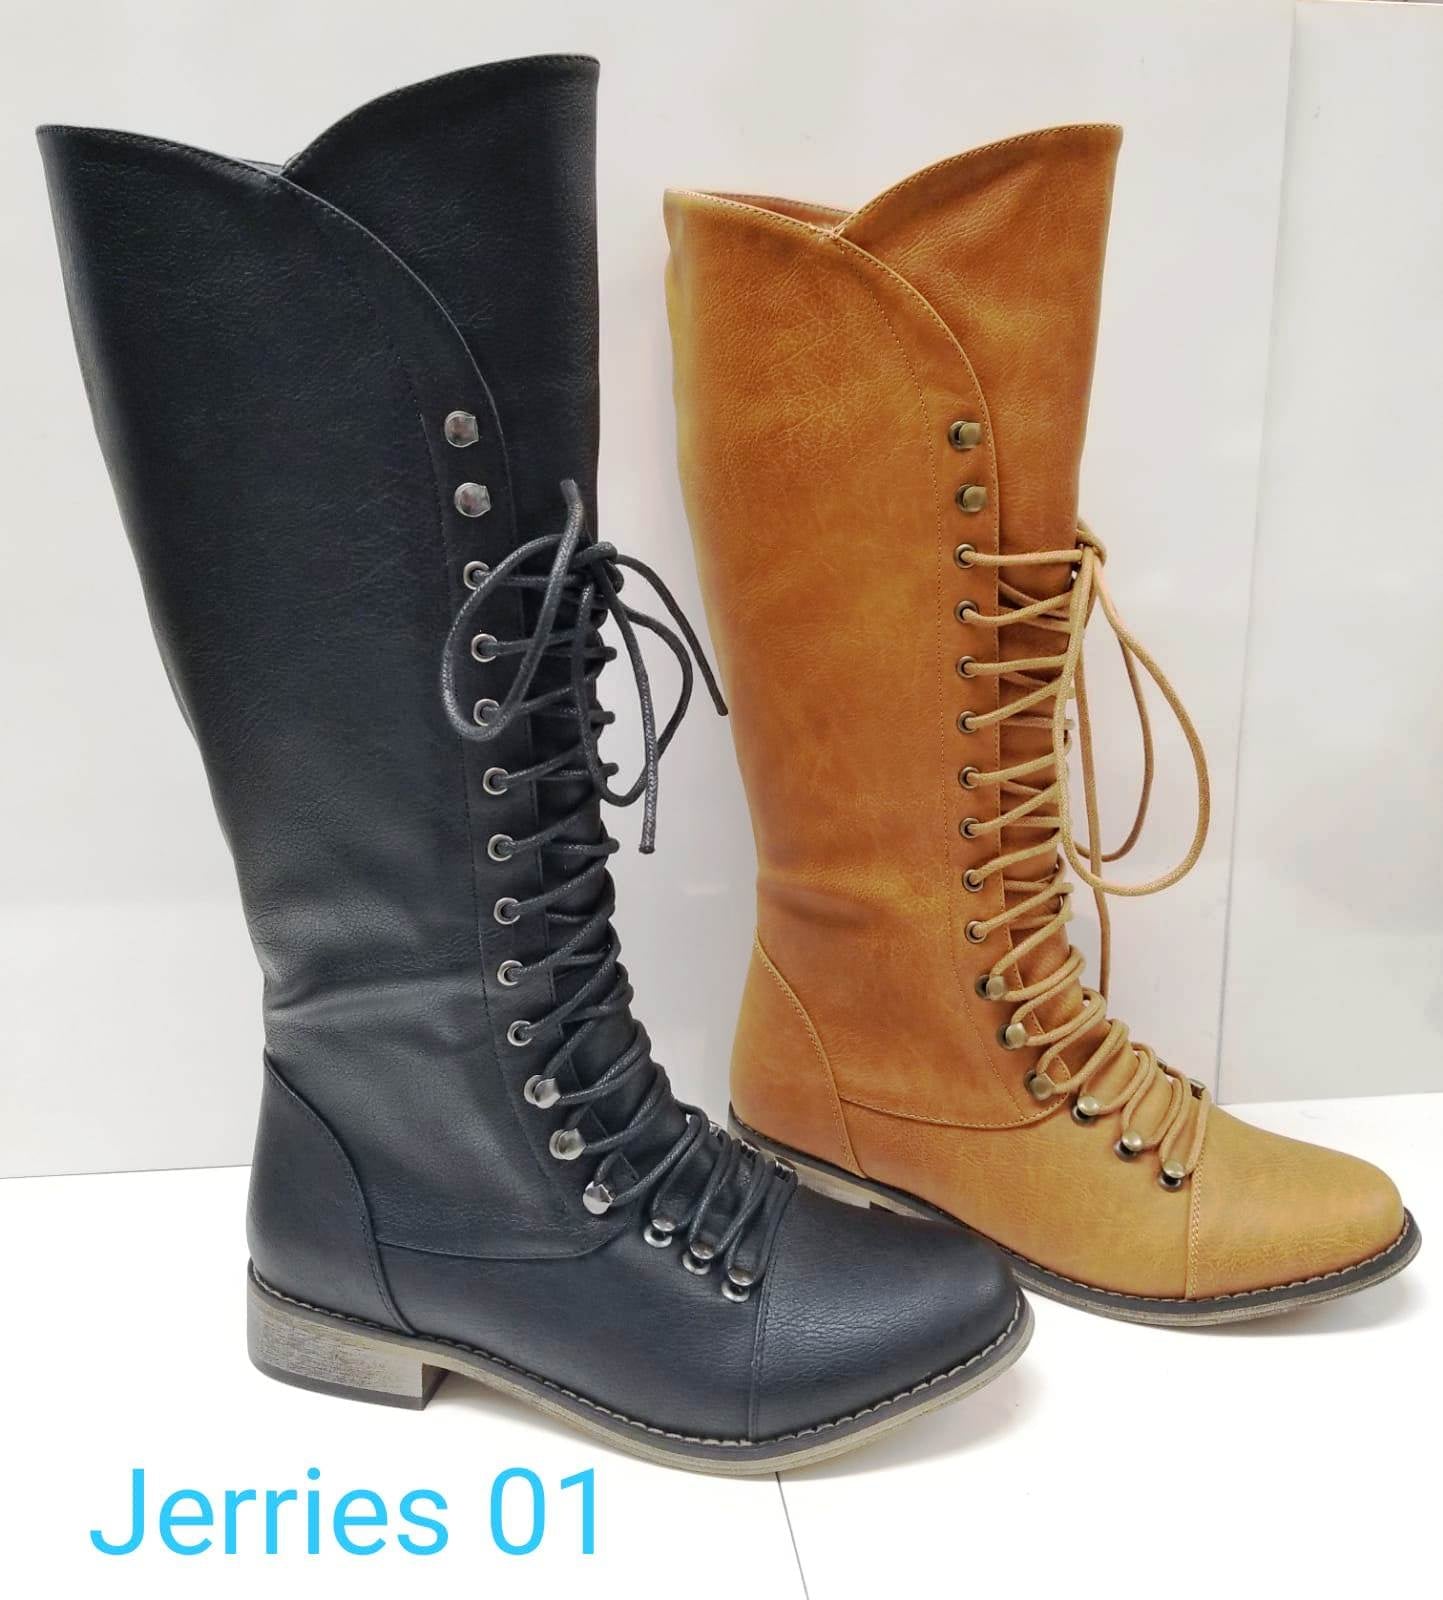 JERRIE-01 Lace Up Knee High Winter Boots For Women's - ShoeTimeStores